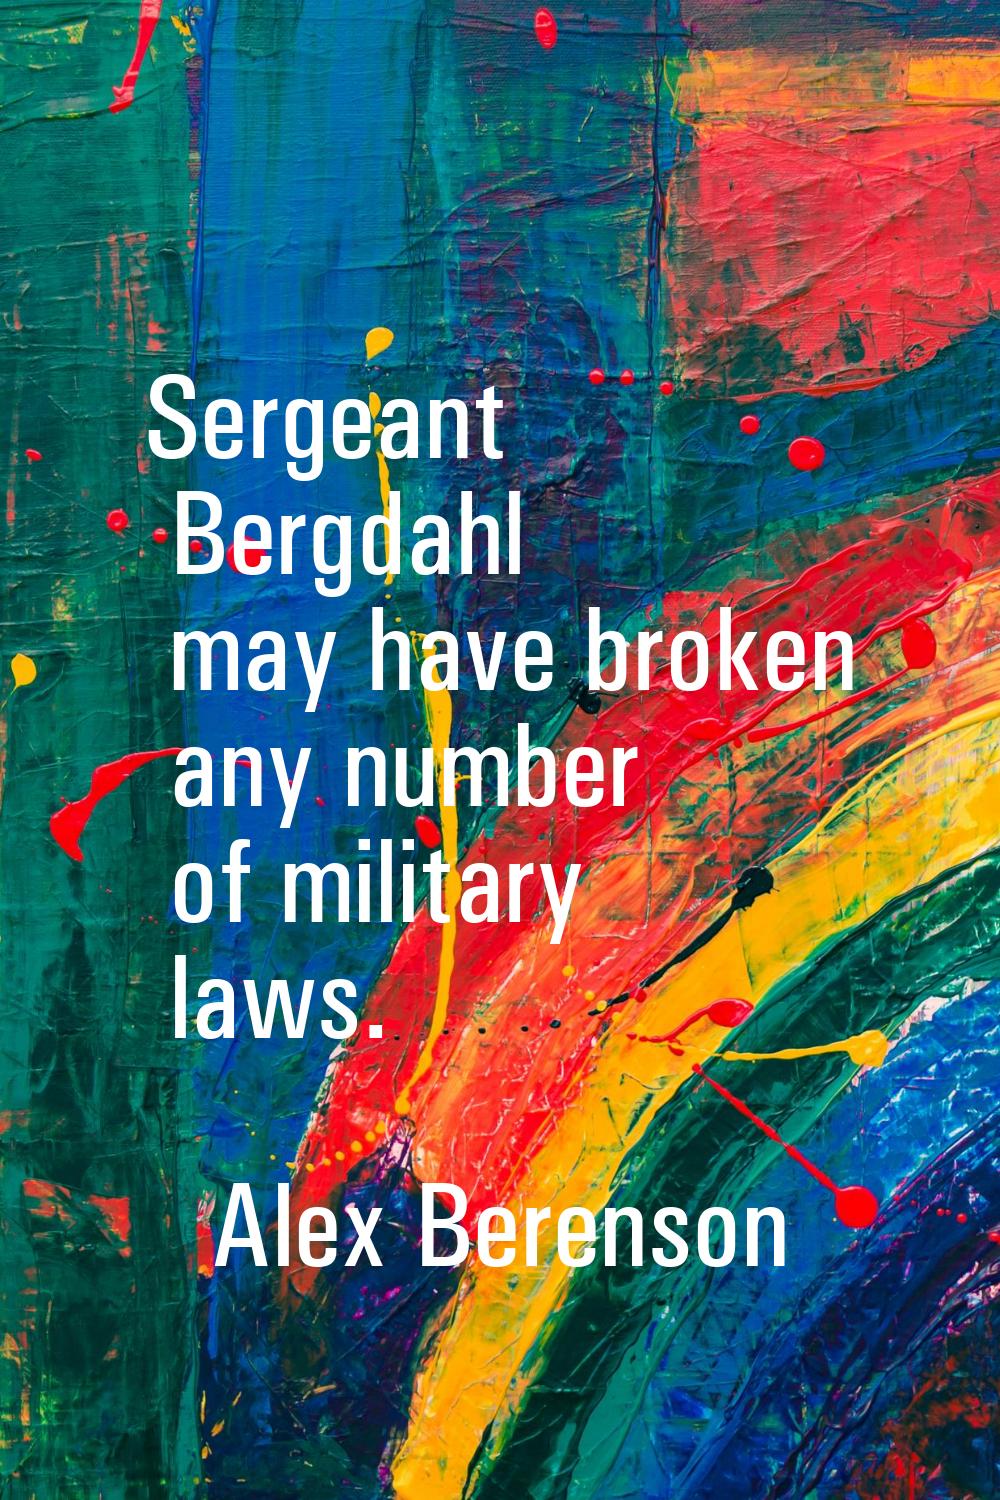 Sergeant Bergdahl may have broken any number of military laws.